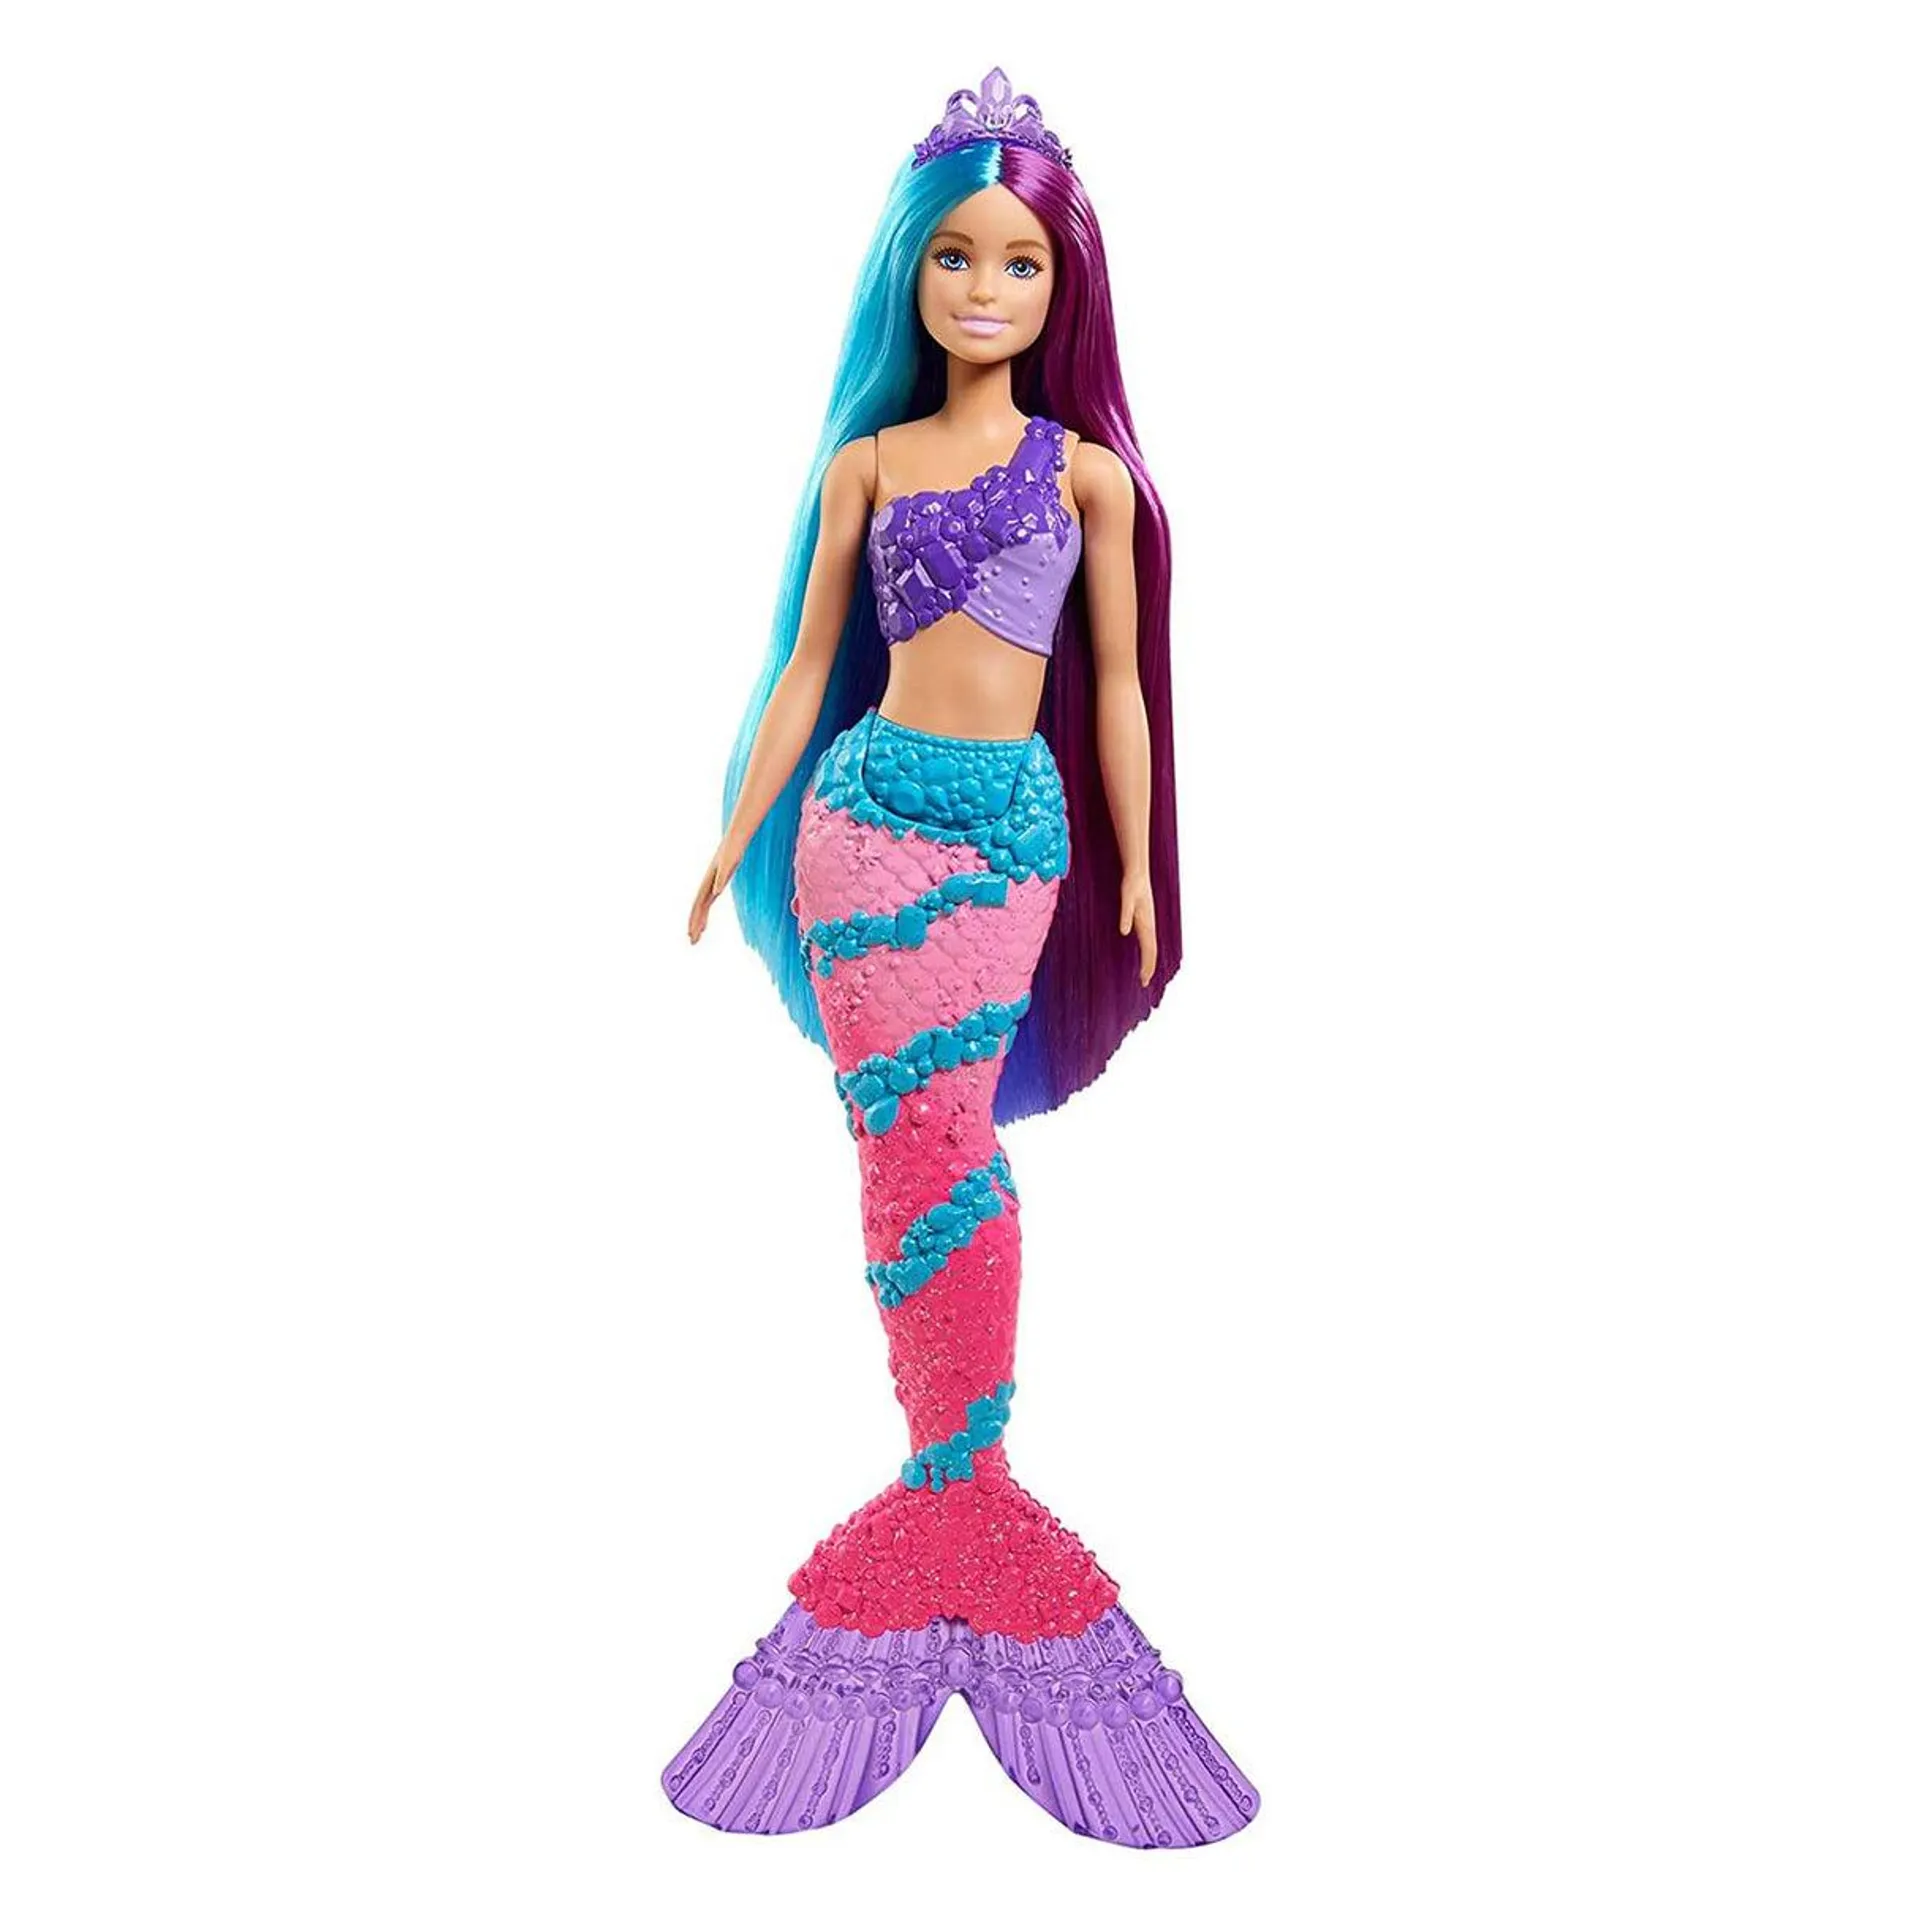 Barbie Dreamtopia Mermaid Doll with Two-Tone Fantasy Hair and Accessories